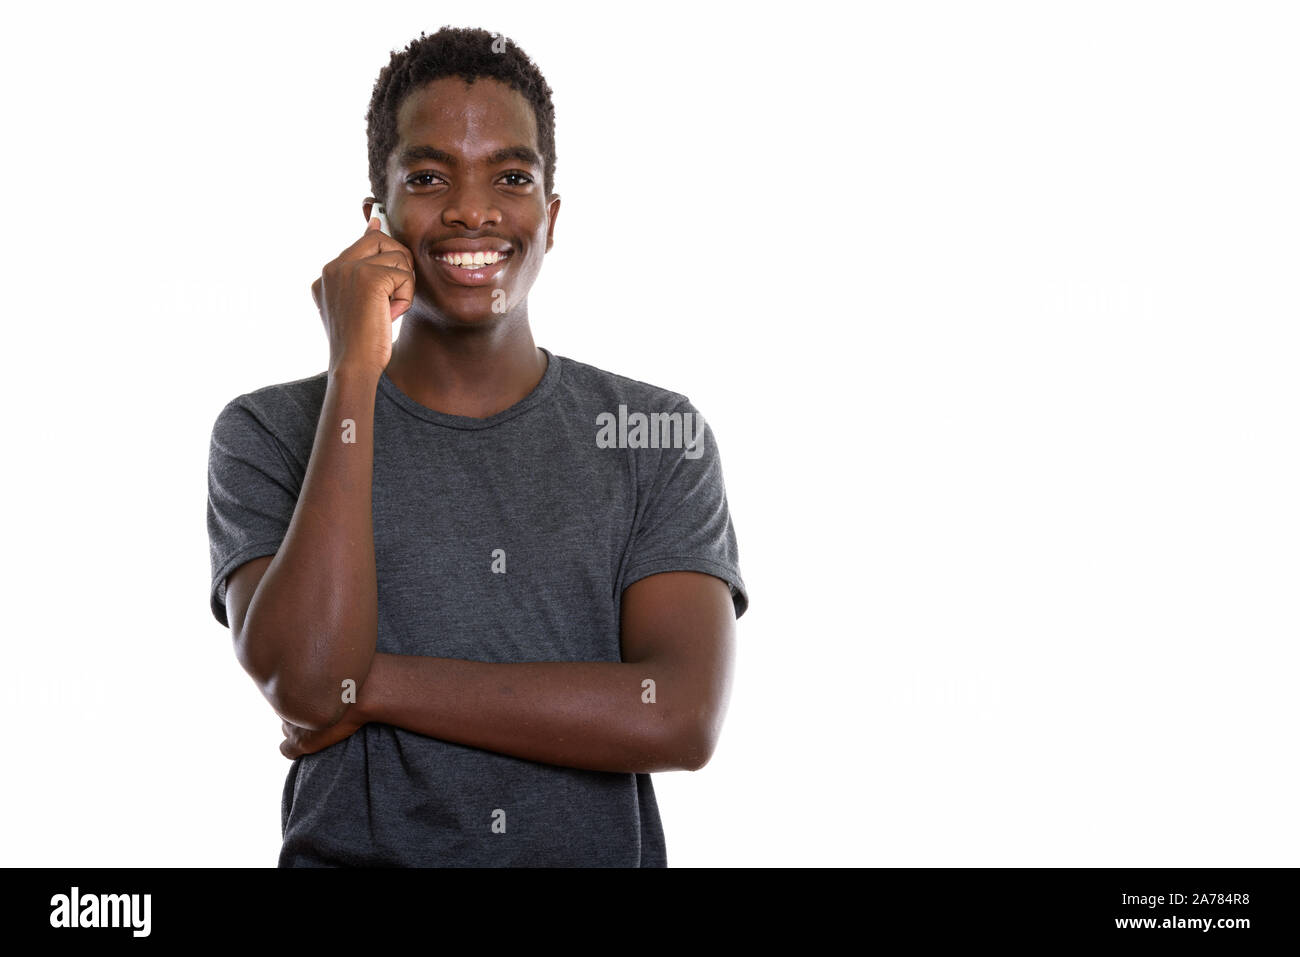 Black Teen Boy Smartphone High Resolution Stock Photography and Images ...